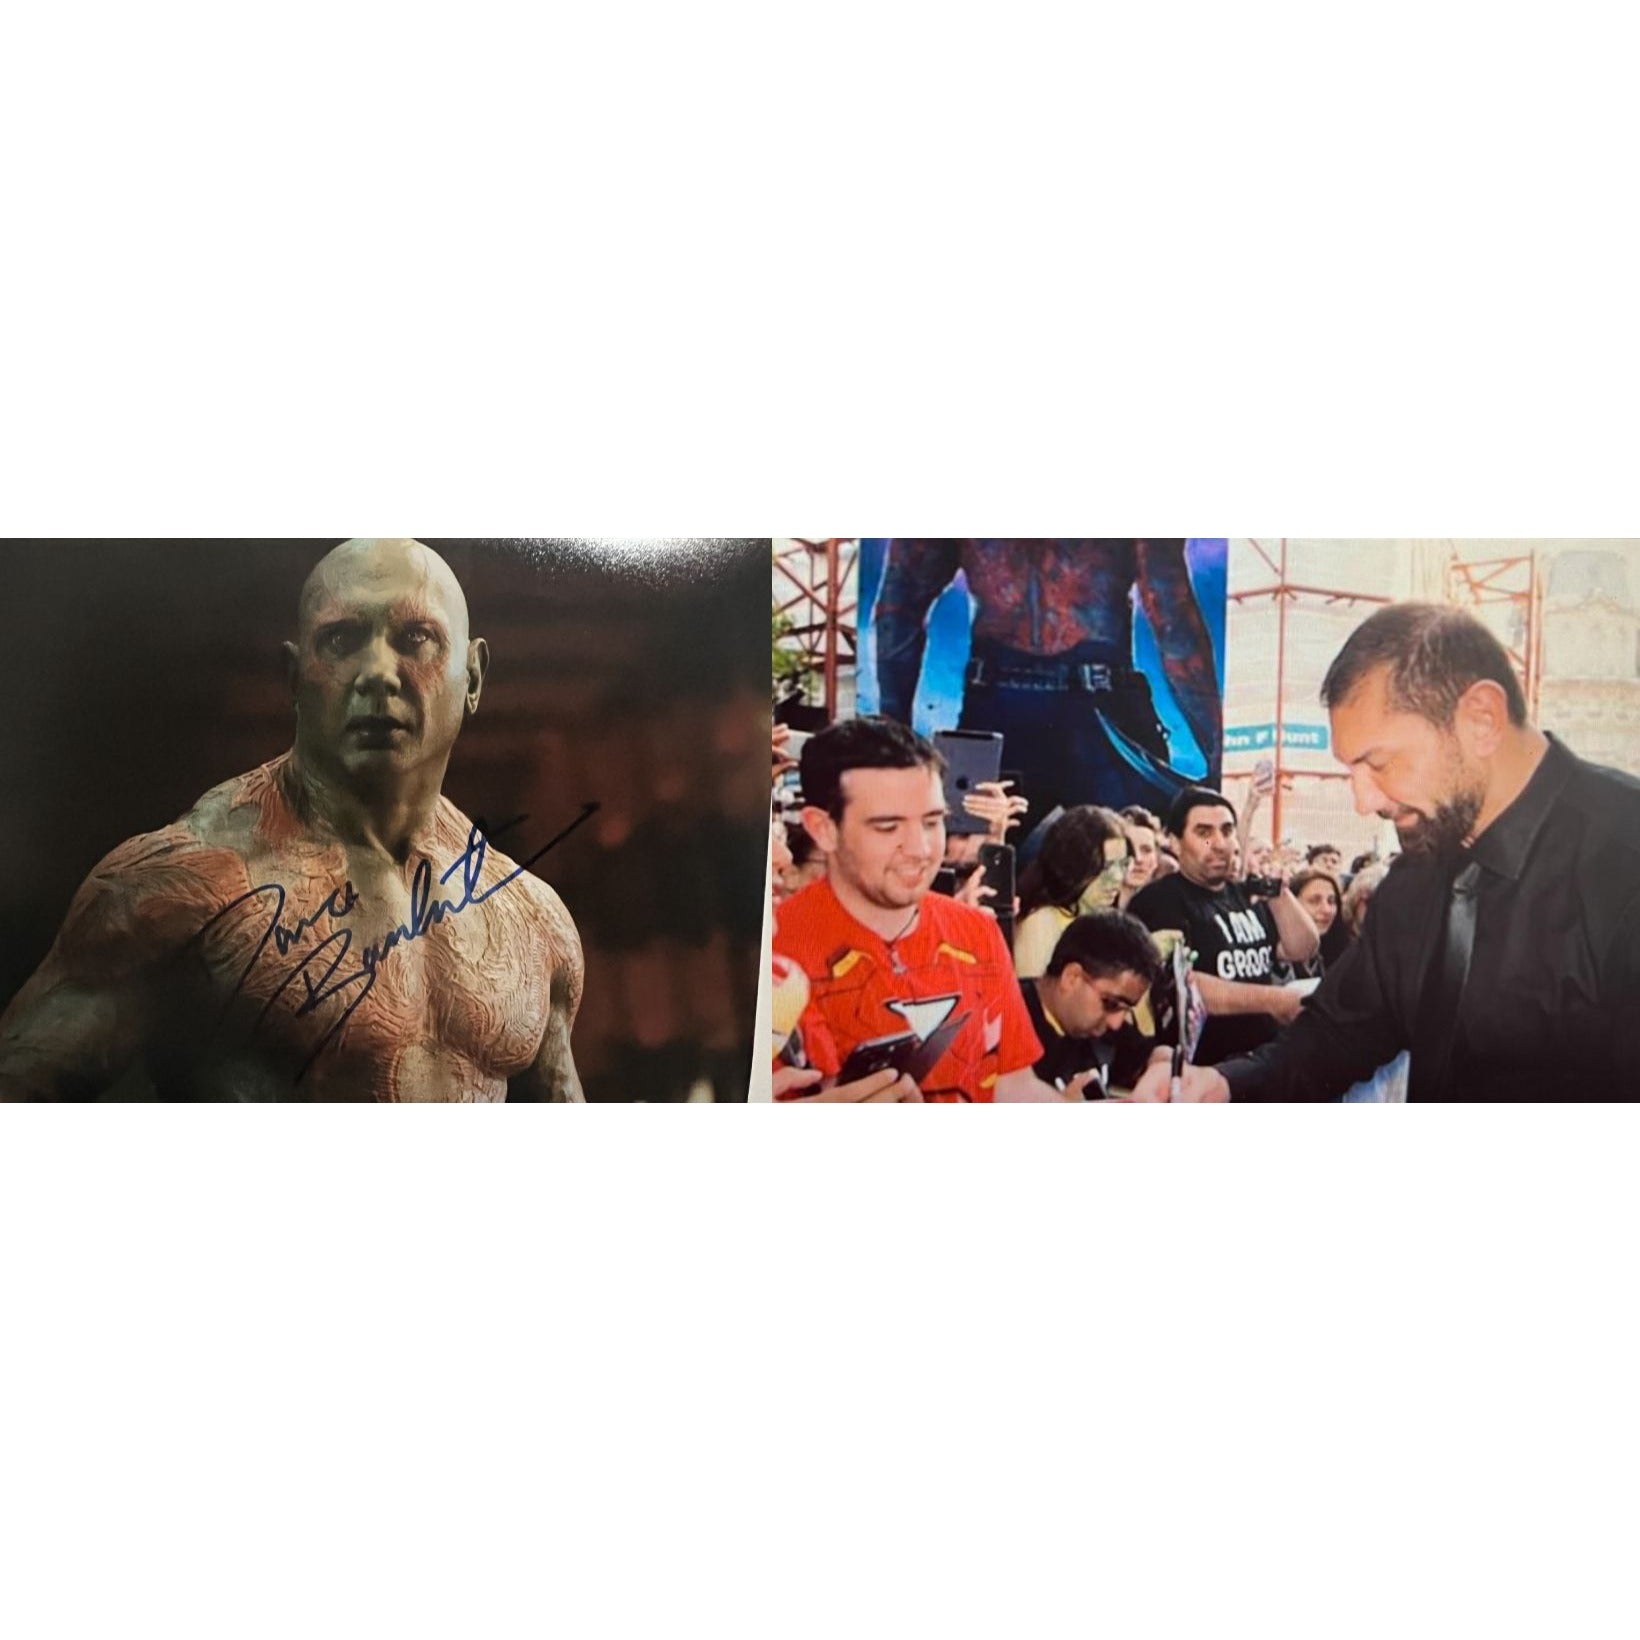 David Bautista  "Drax" in Marvels' Guardians of the Galaxy 5x7 photo signed with proof